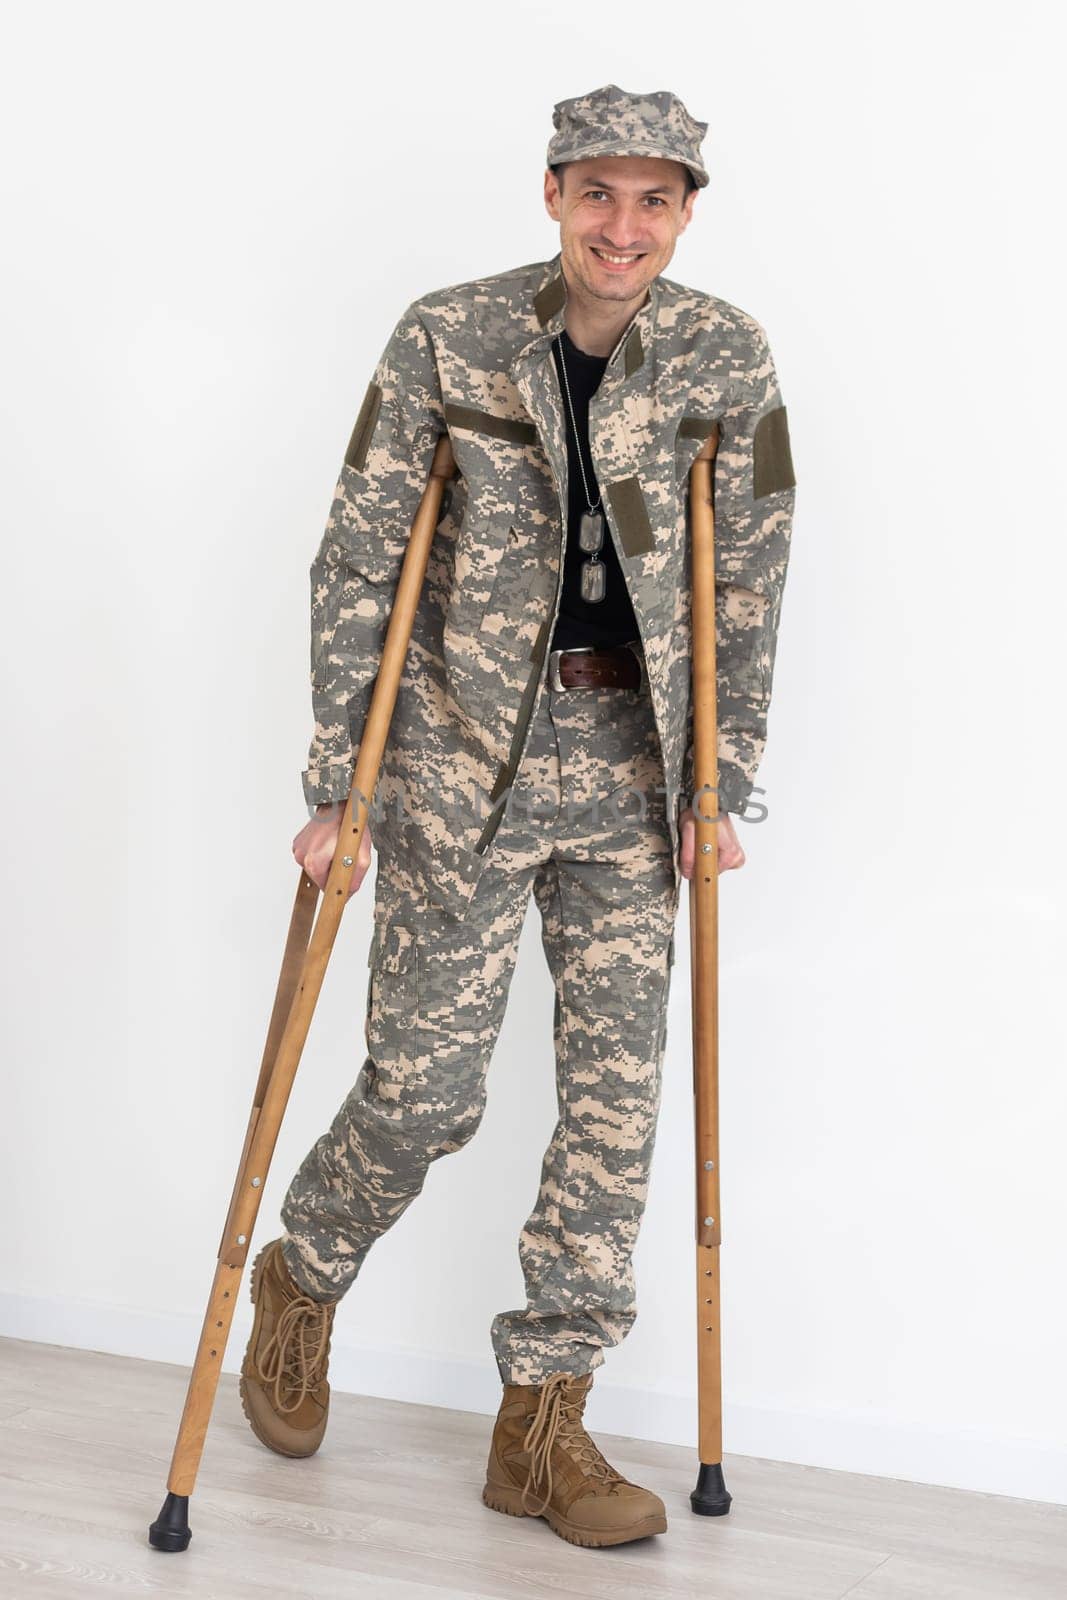 Portrait of soldier with crutches against white background by Andelov13